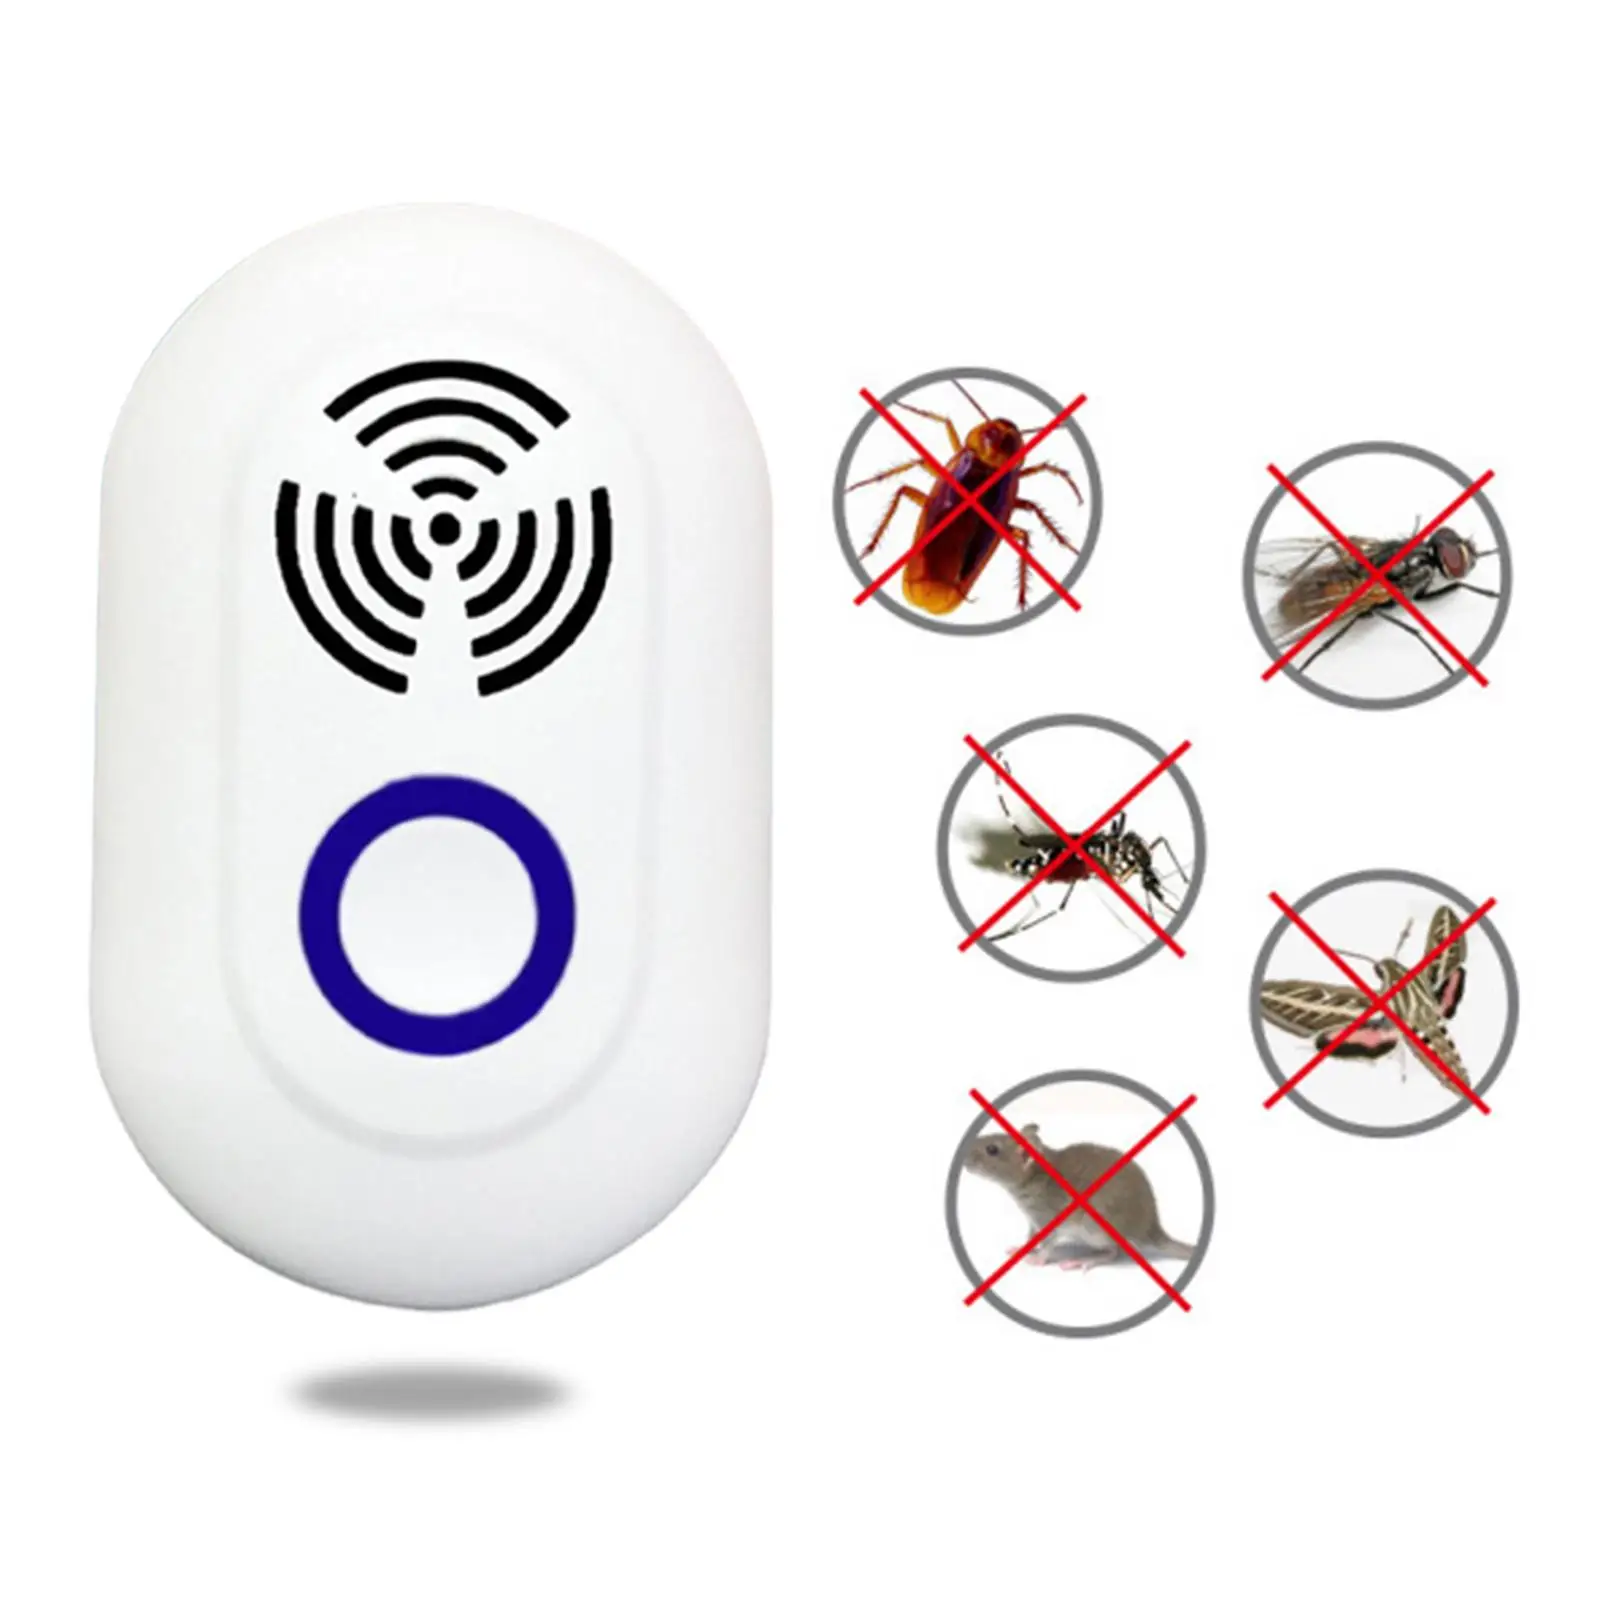 Portable Ultrasonic Insect Repeller Quiet Work Indoor Anti-Mice Pest Repellers for Mosquito Rat Pest Killer Garden Suppy US